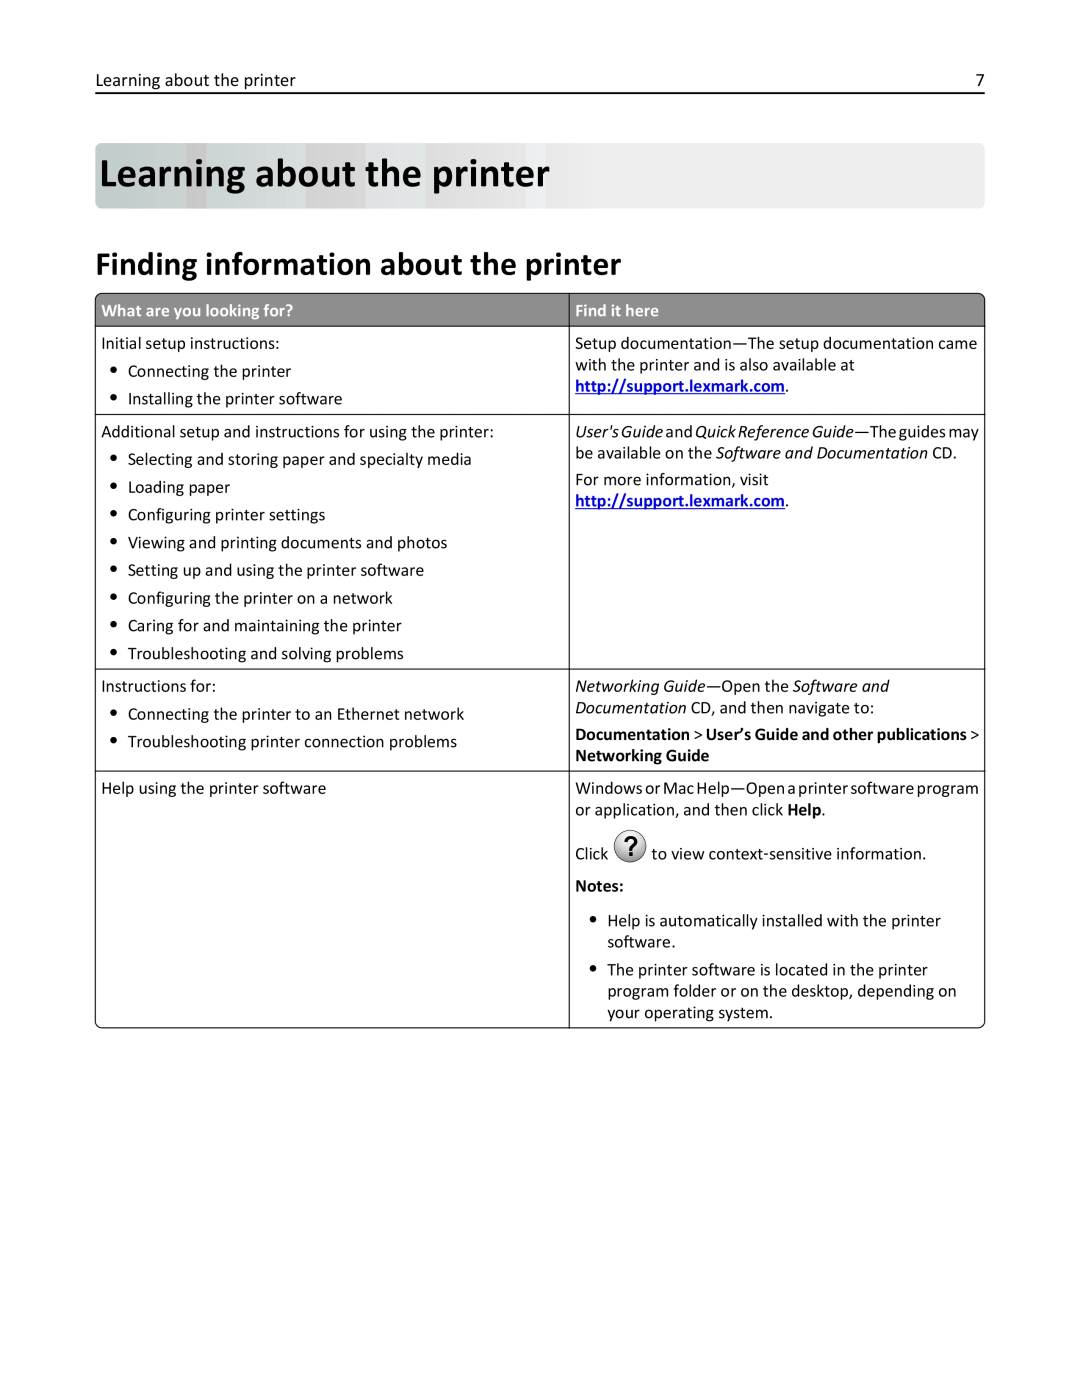 Lexmark 748dte Learning about theprinter, Finding information about the printer, Networking Guide—Openthe Software and 